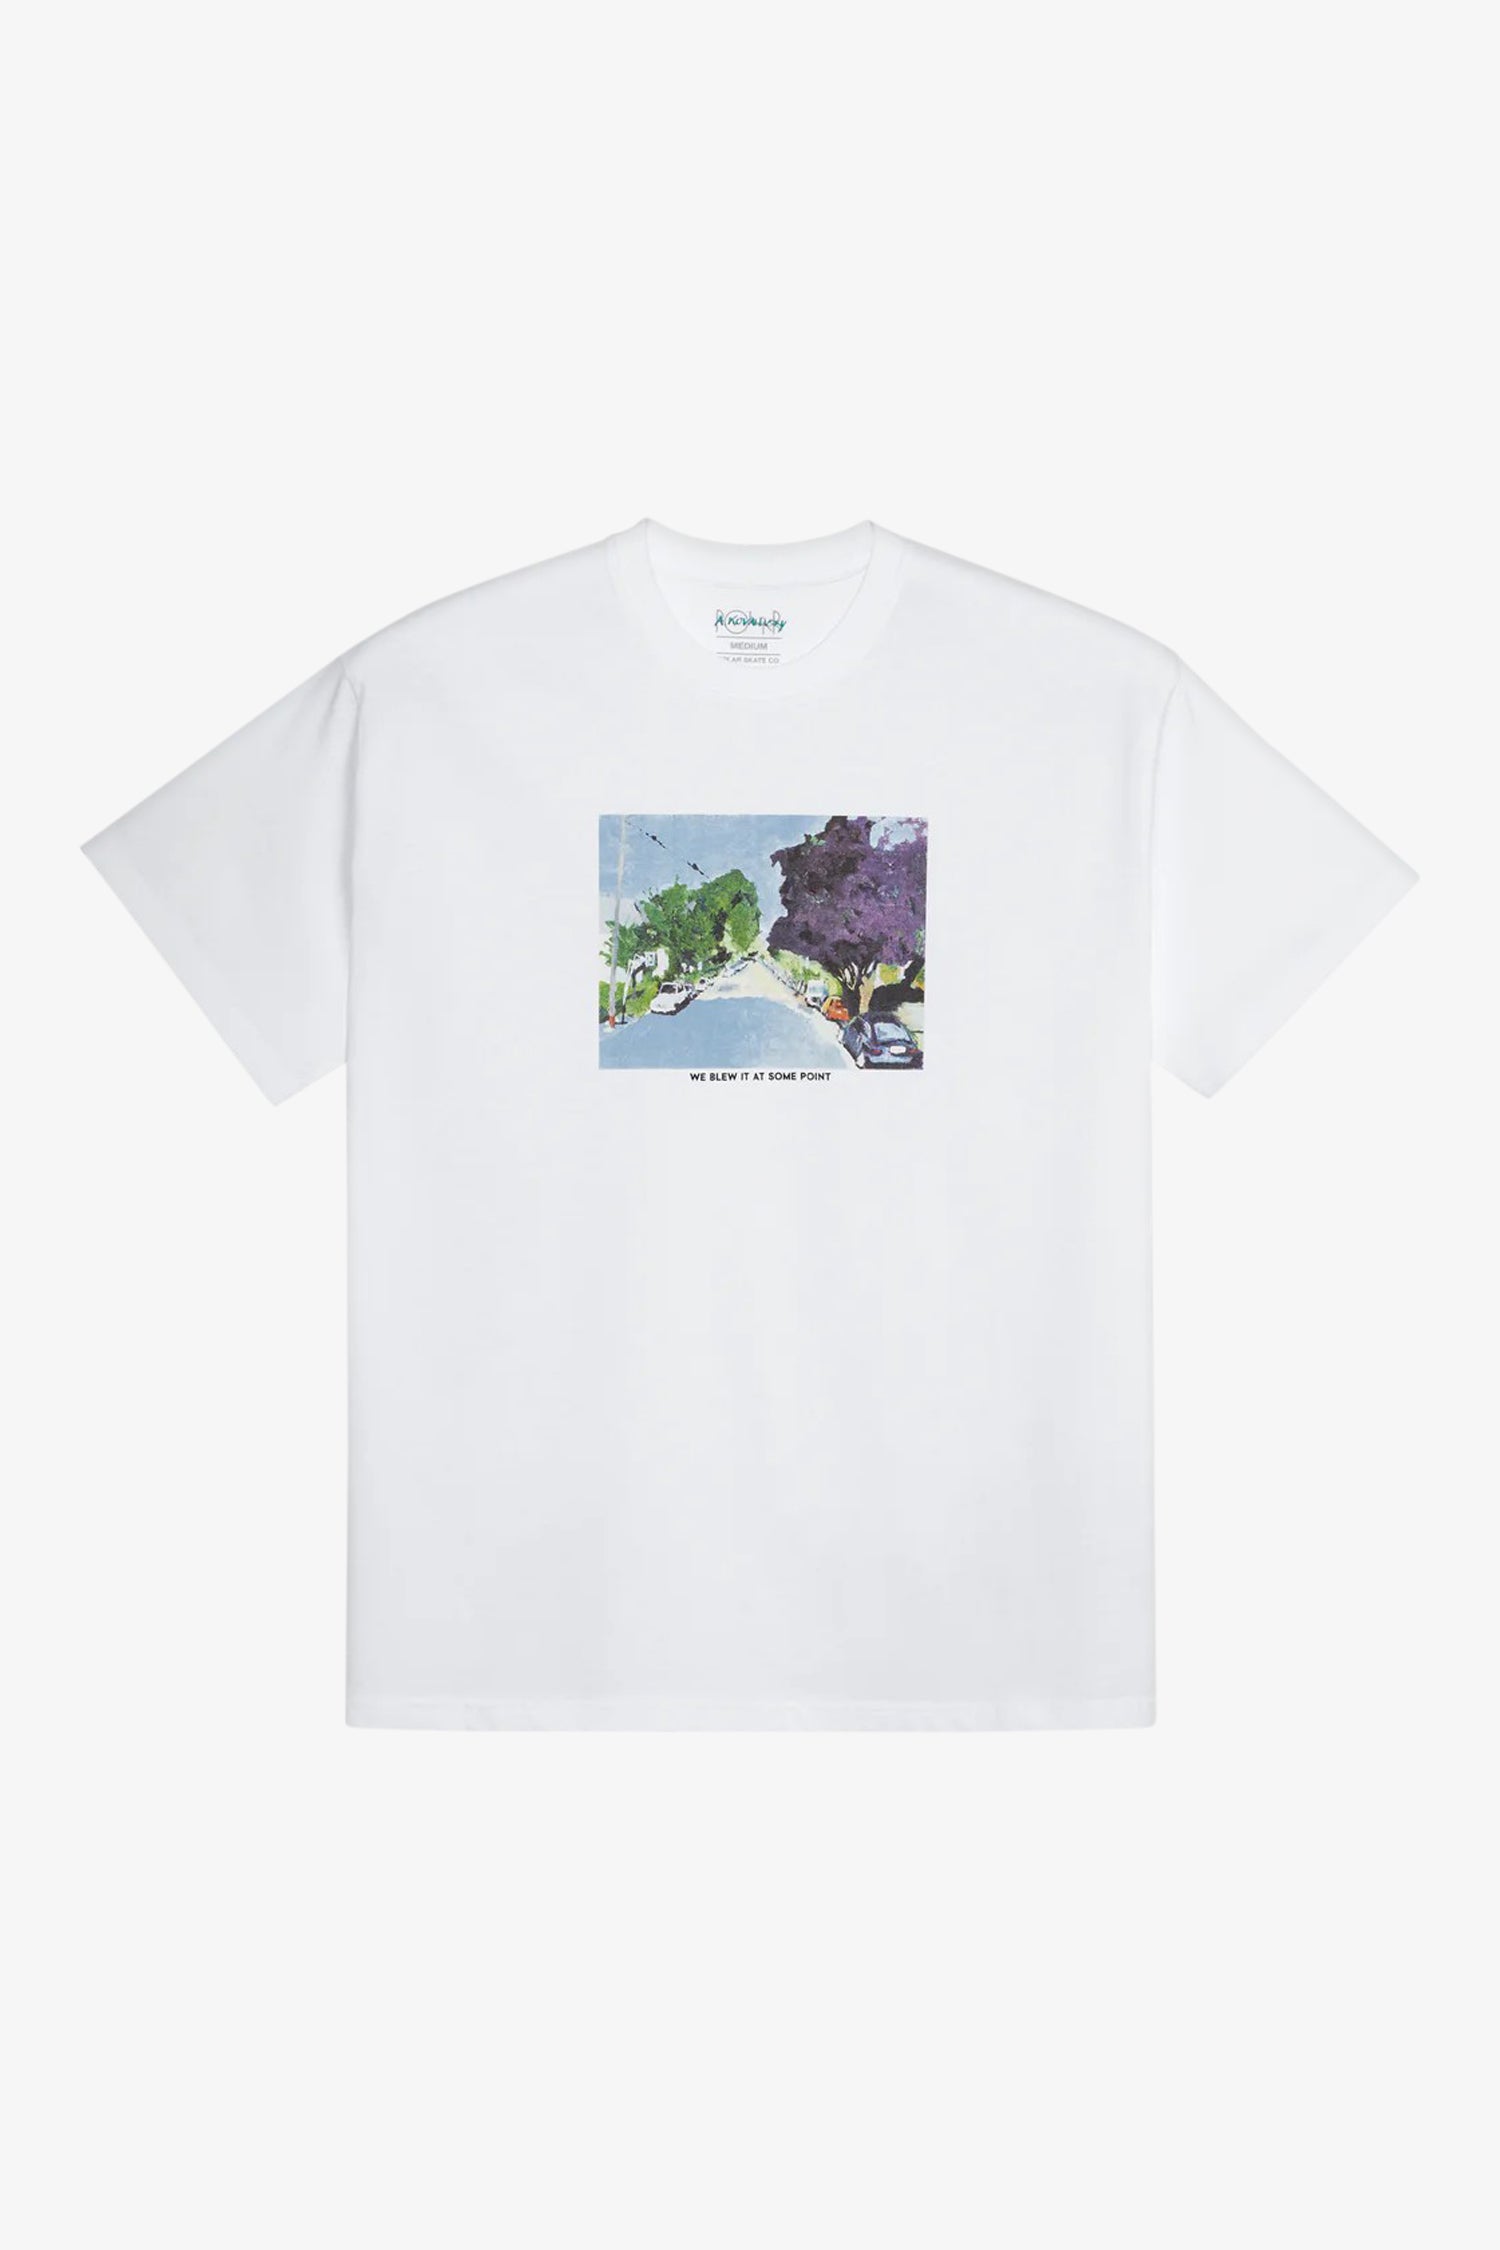 We Blew It At Some Point Tee- Selectshop FRAME